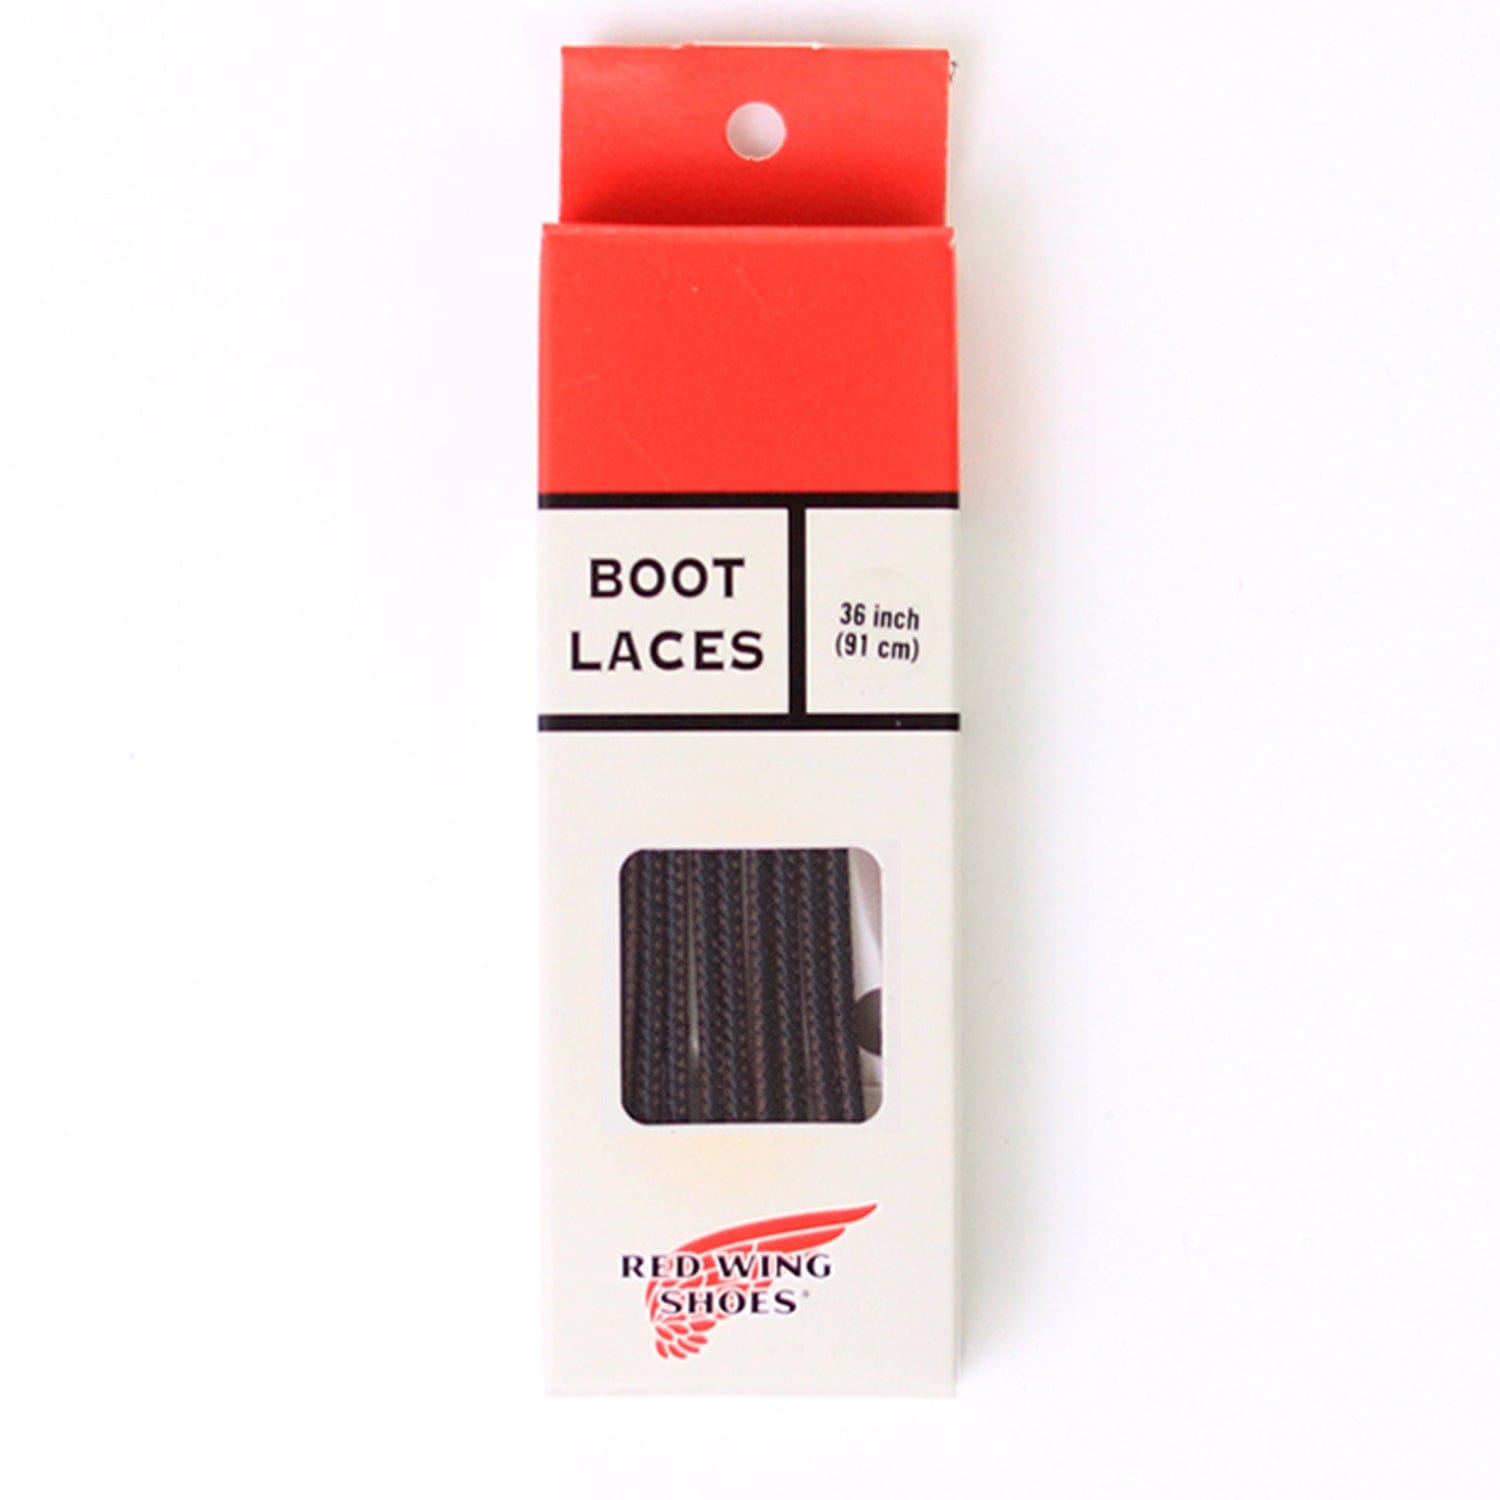 36 inch boot laces